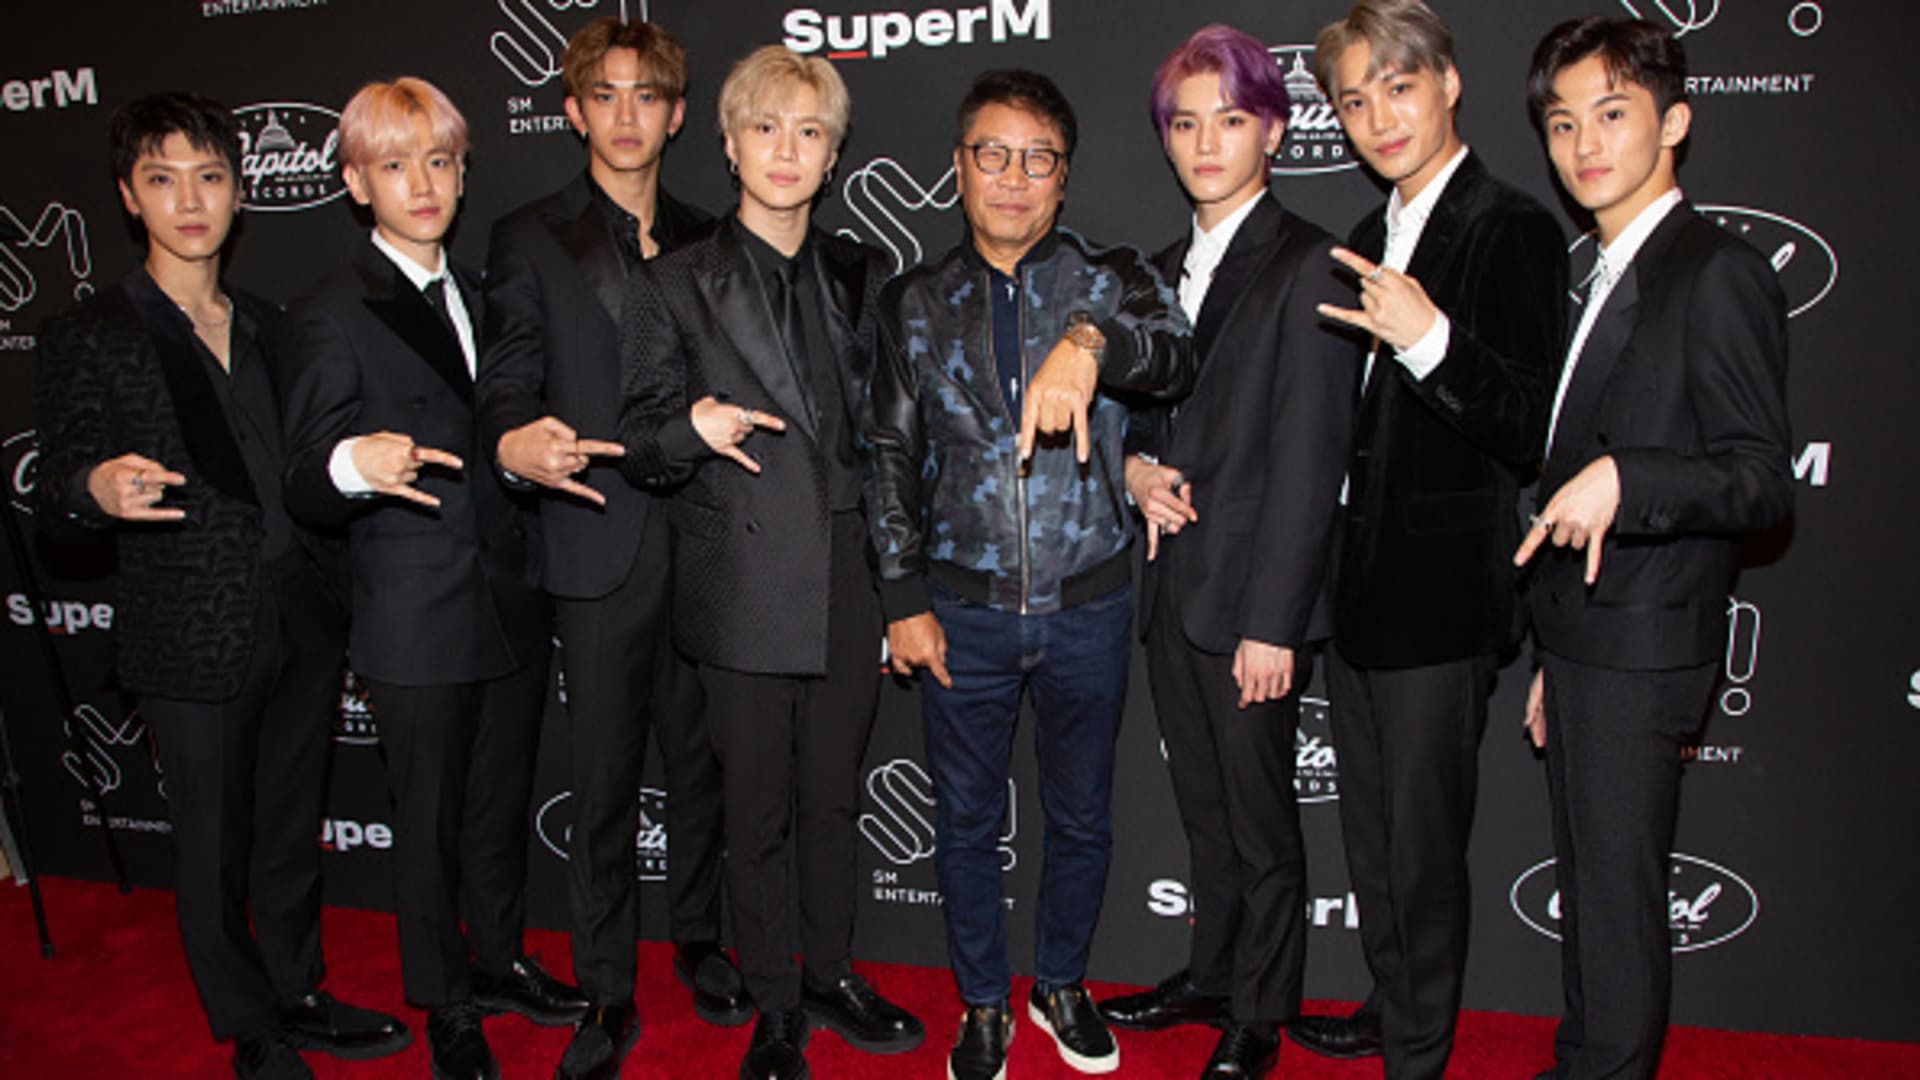 SM Entertainment's Soo-man Lee (fourth from the right) posing with K-pop supergroup SuperM.